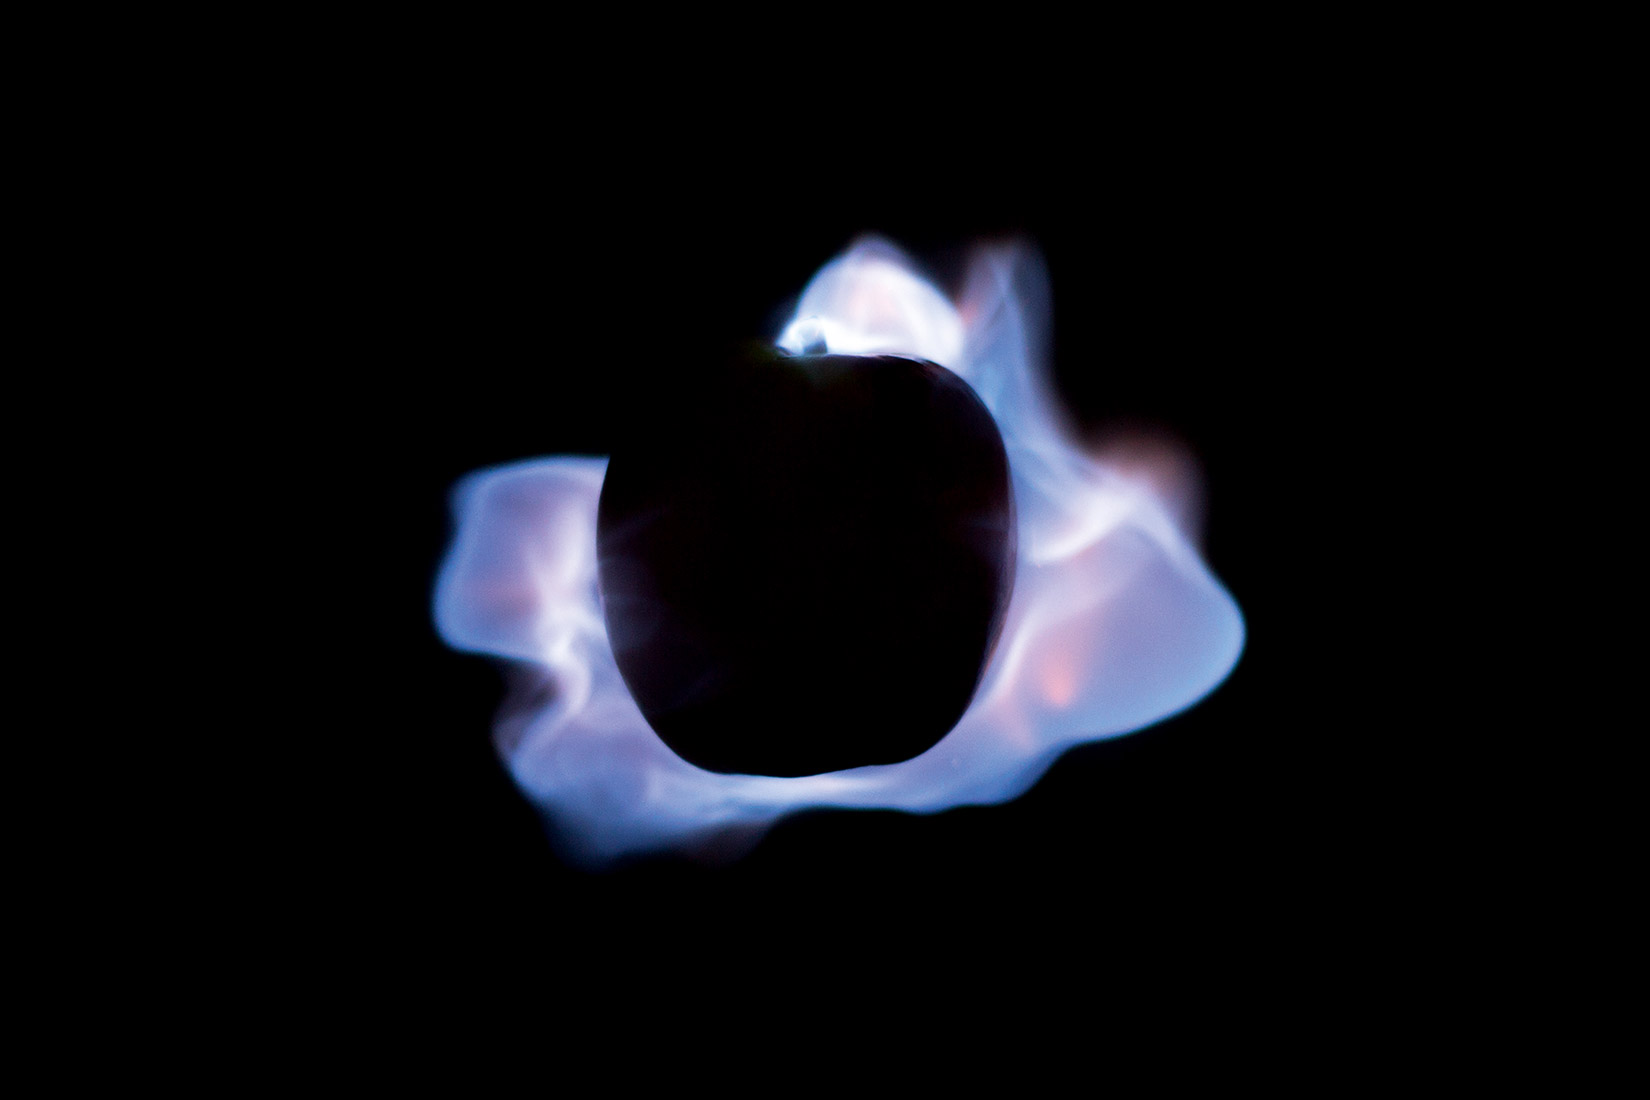 Gaspillage alimentaire, pomme, image abstraite, flames, silhouette, feu